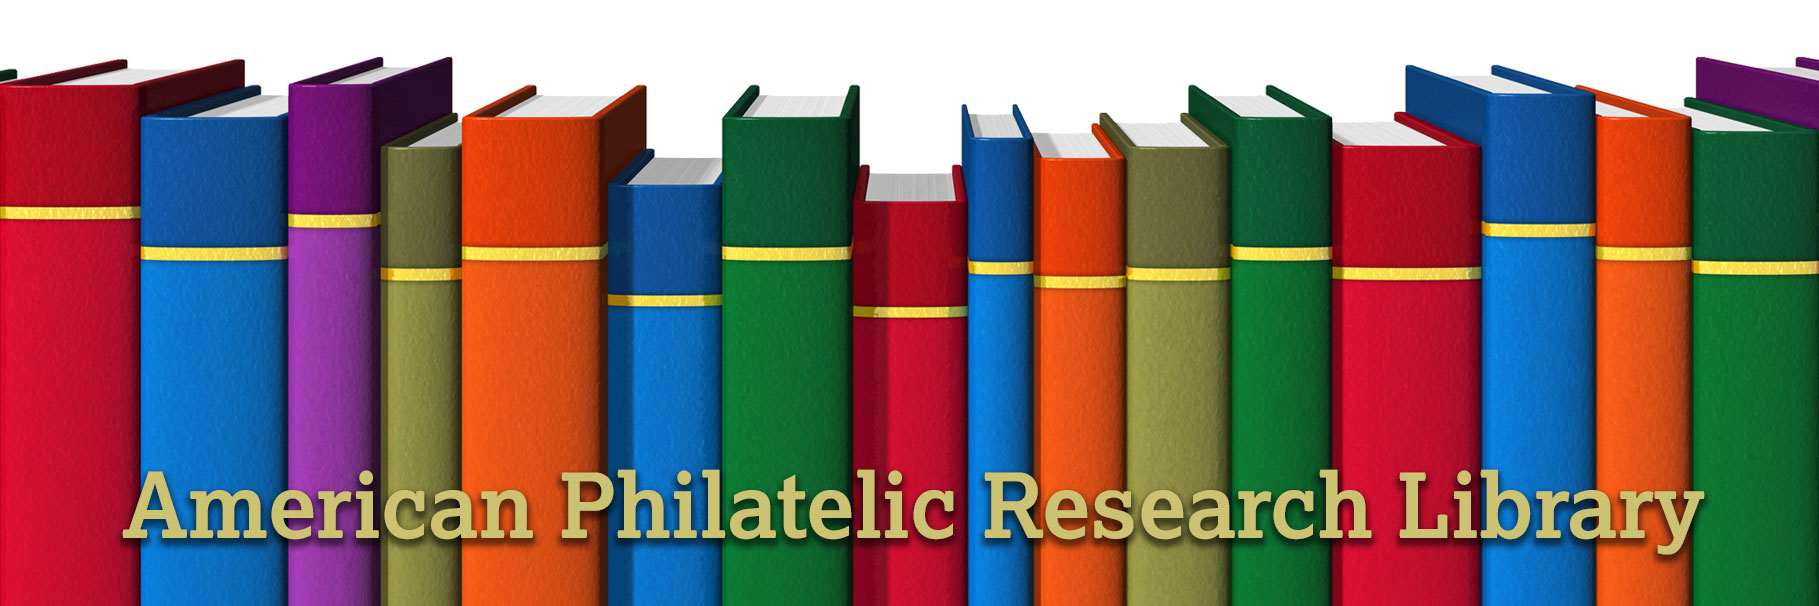 American Philatelic Research Library